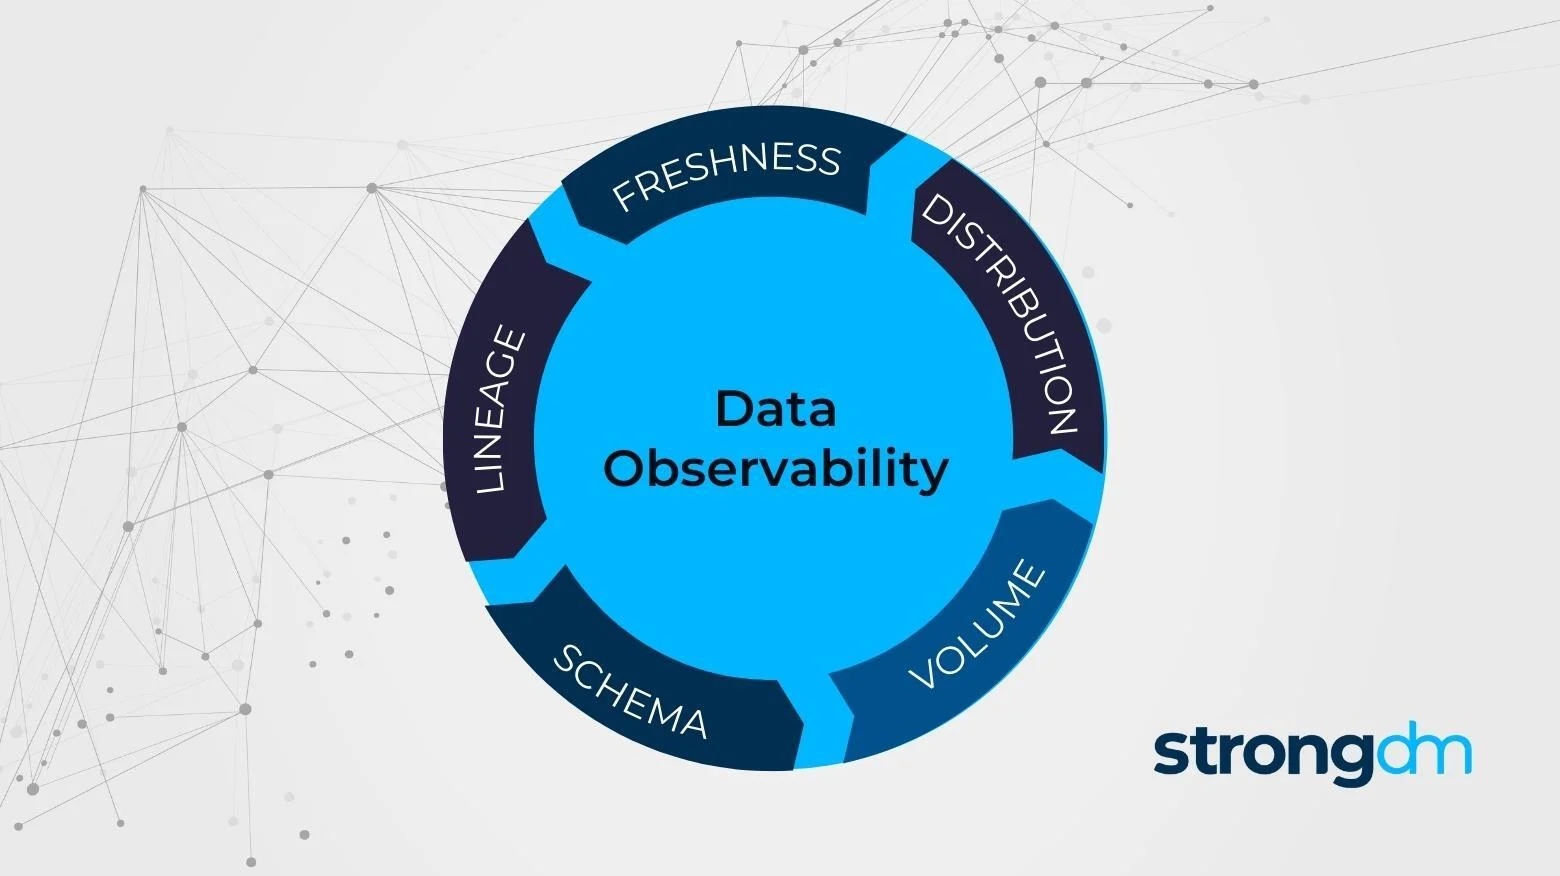 What is Data Observability?